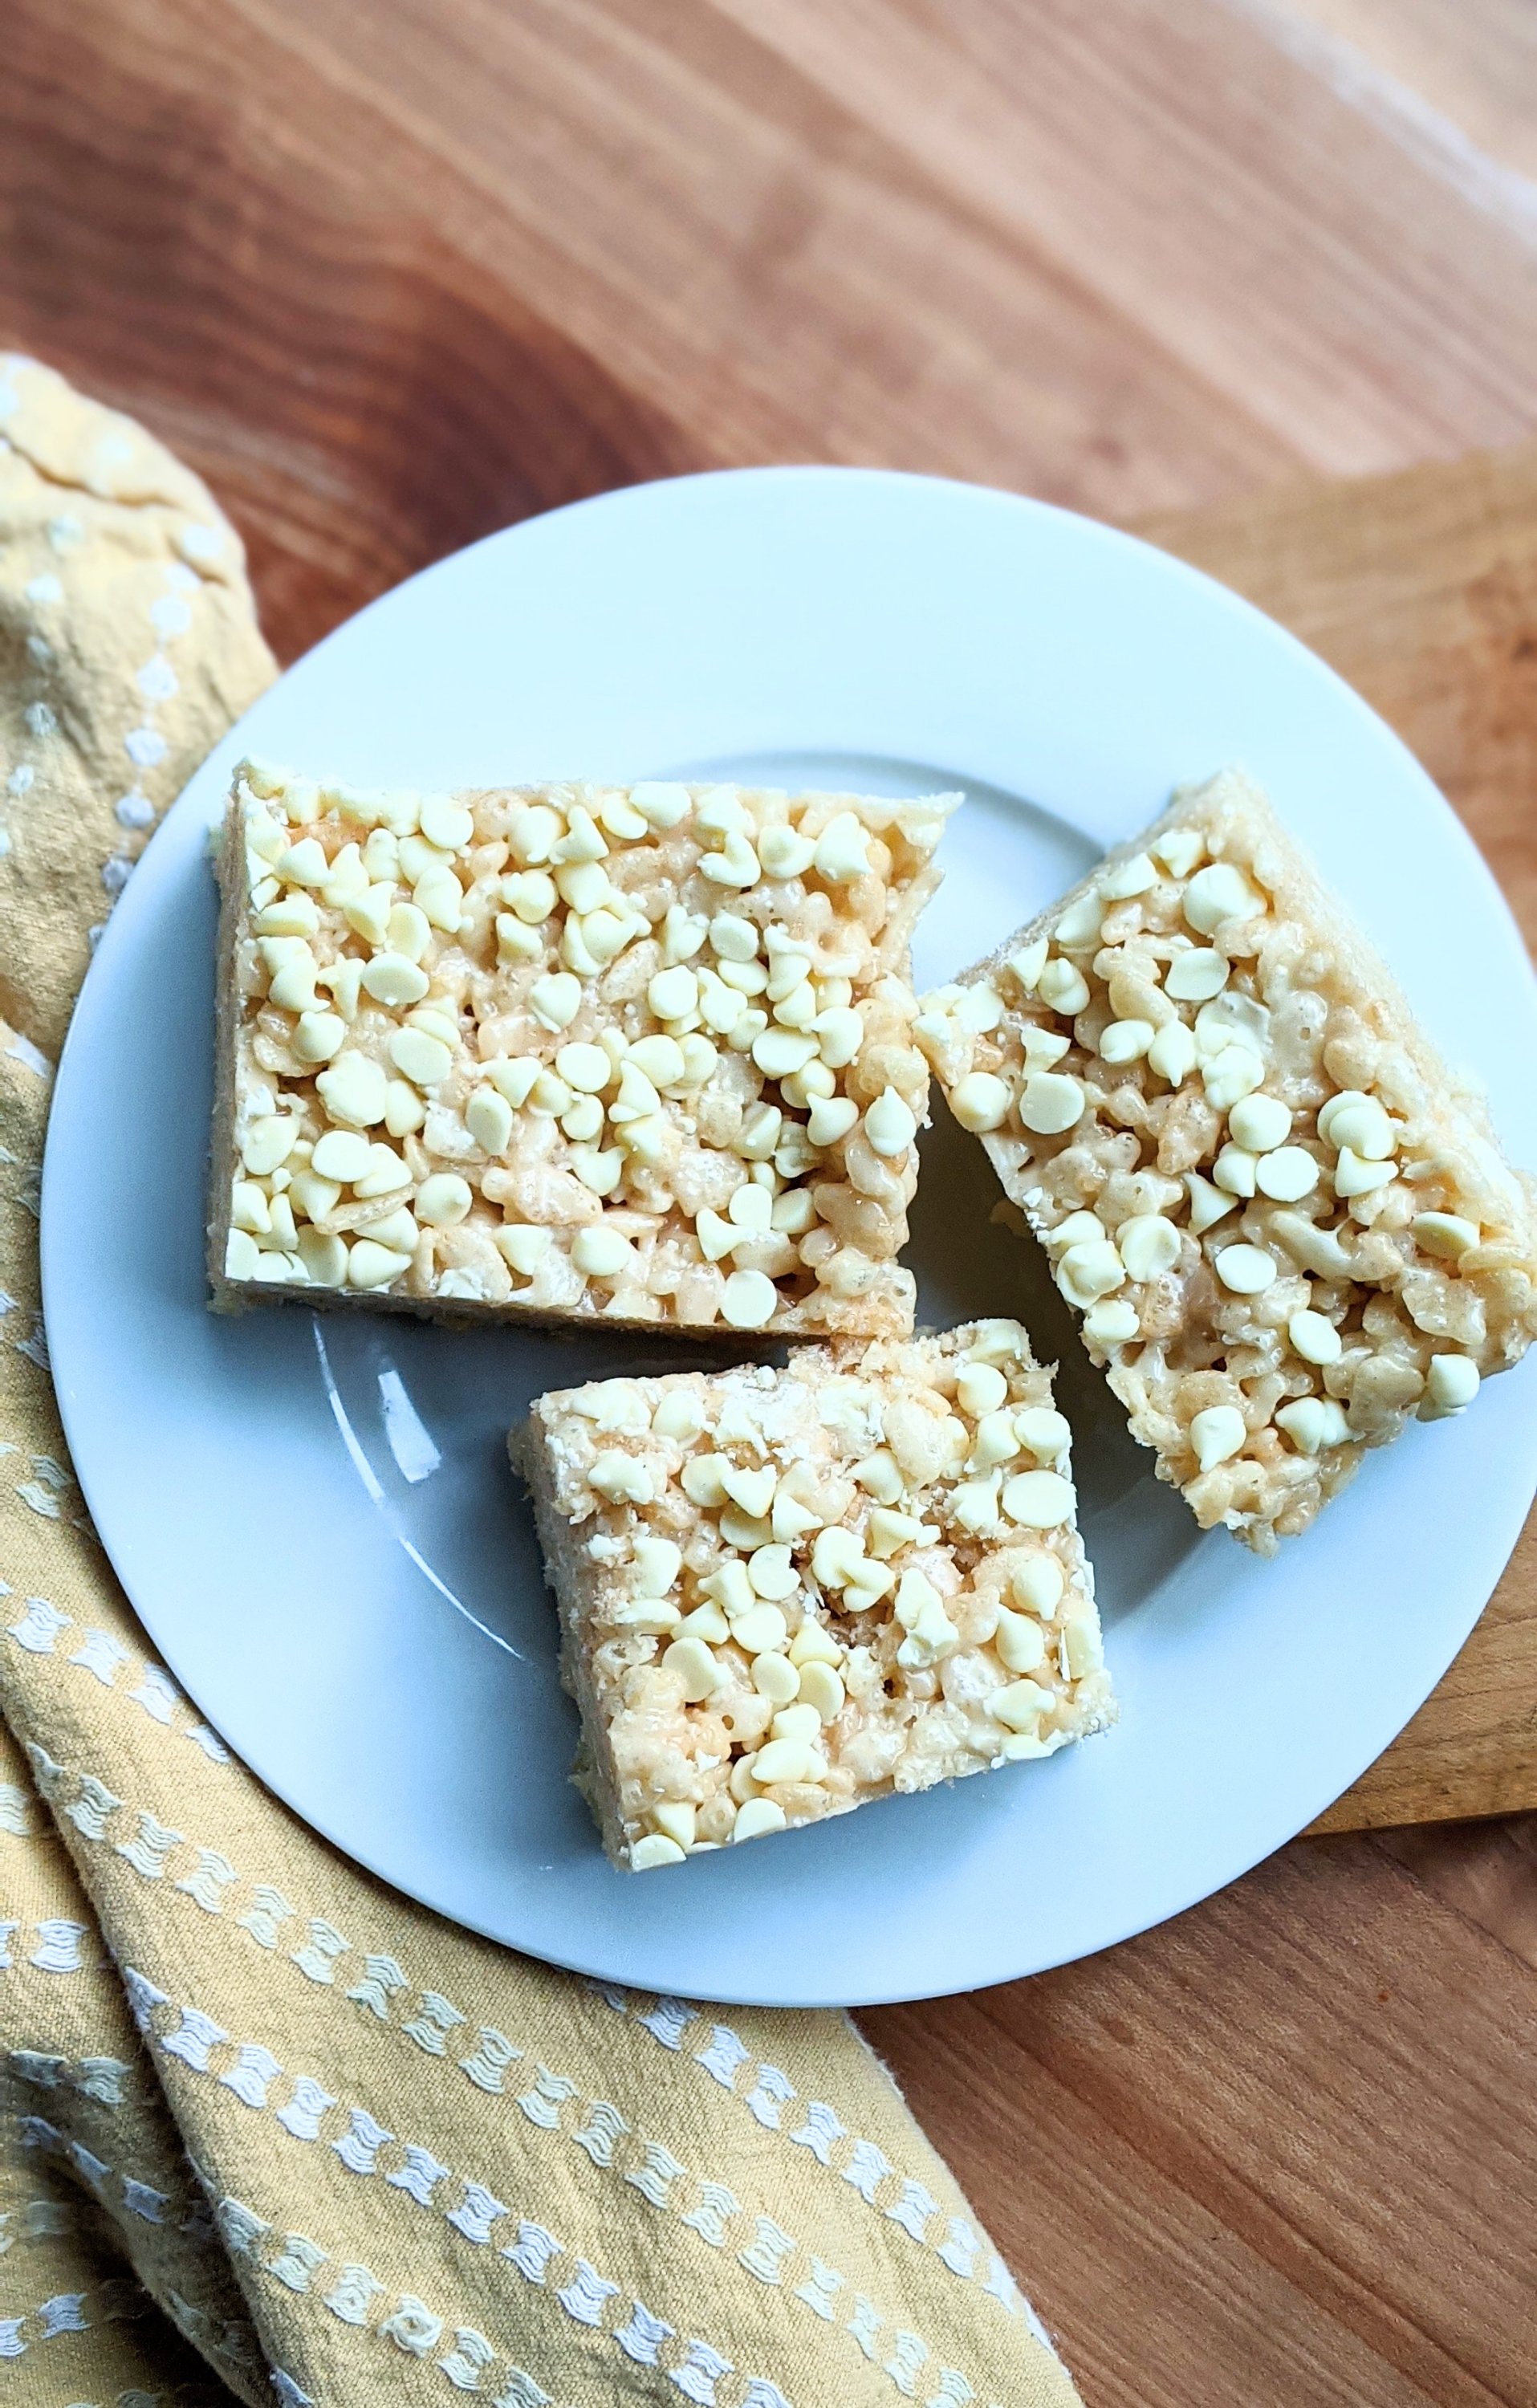 rice crispy treats white chocolate rice krispie treats recipes with white chocolate chips what to do with pantry staple ingredients easy desserts for kids to make on rainy days